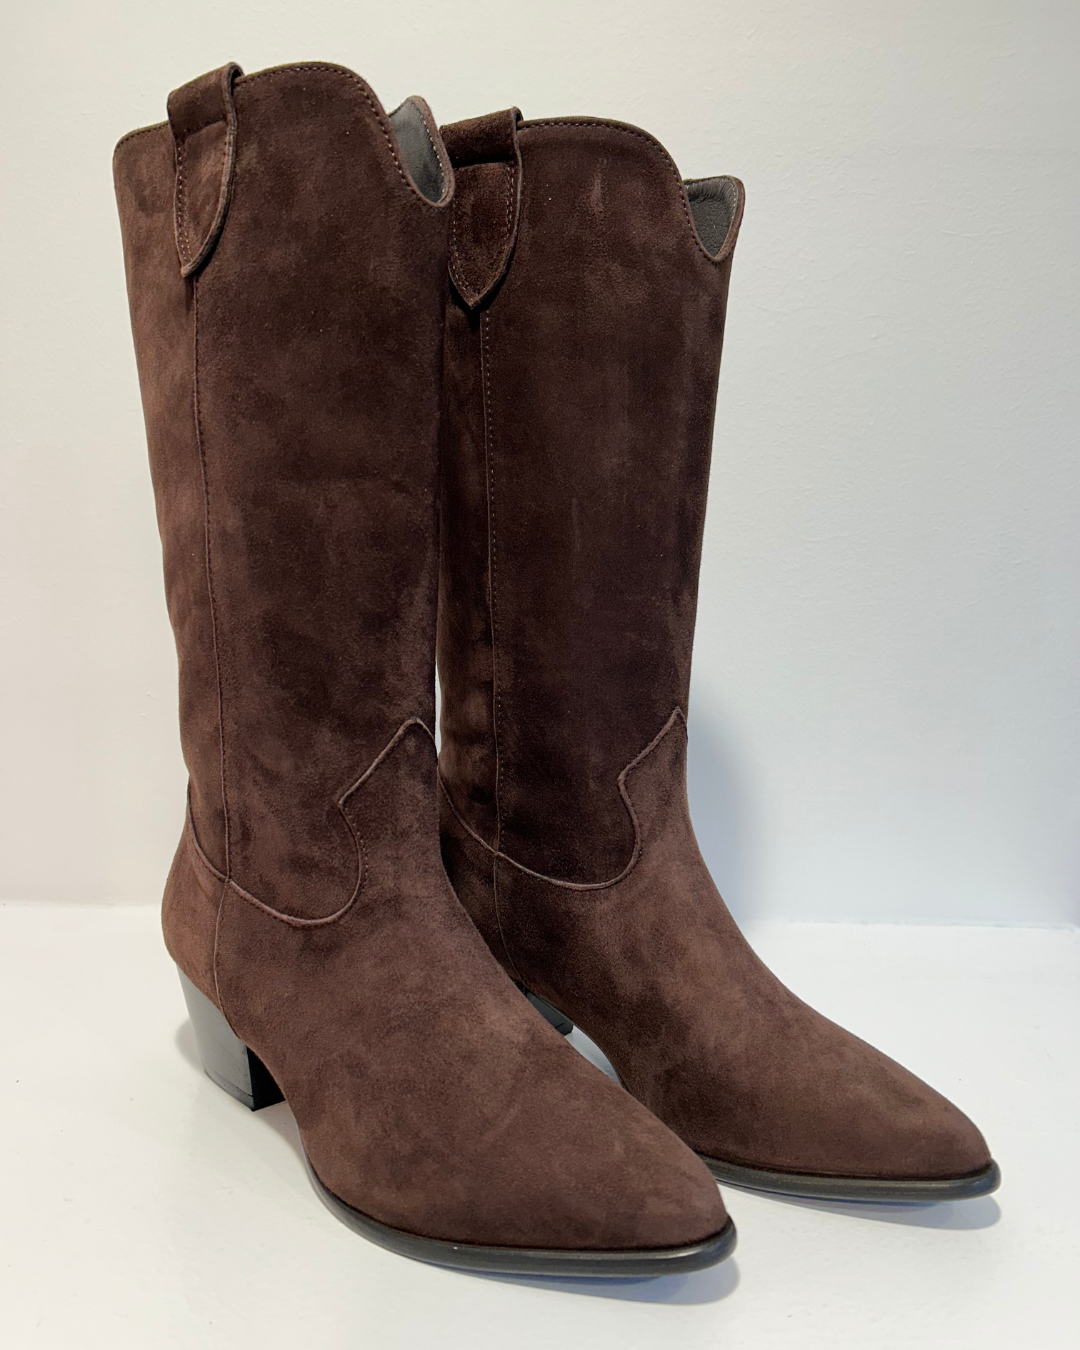 Chocolate brown suede mid length pull on cowboy style boots